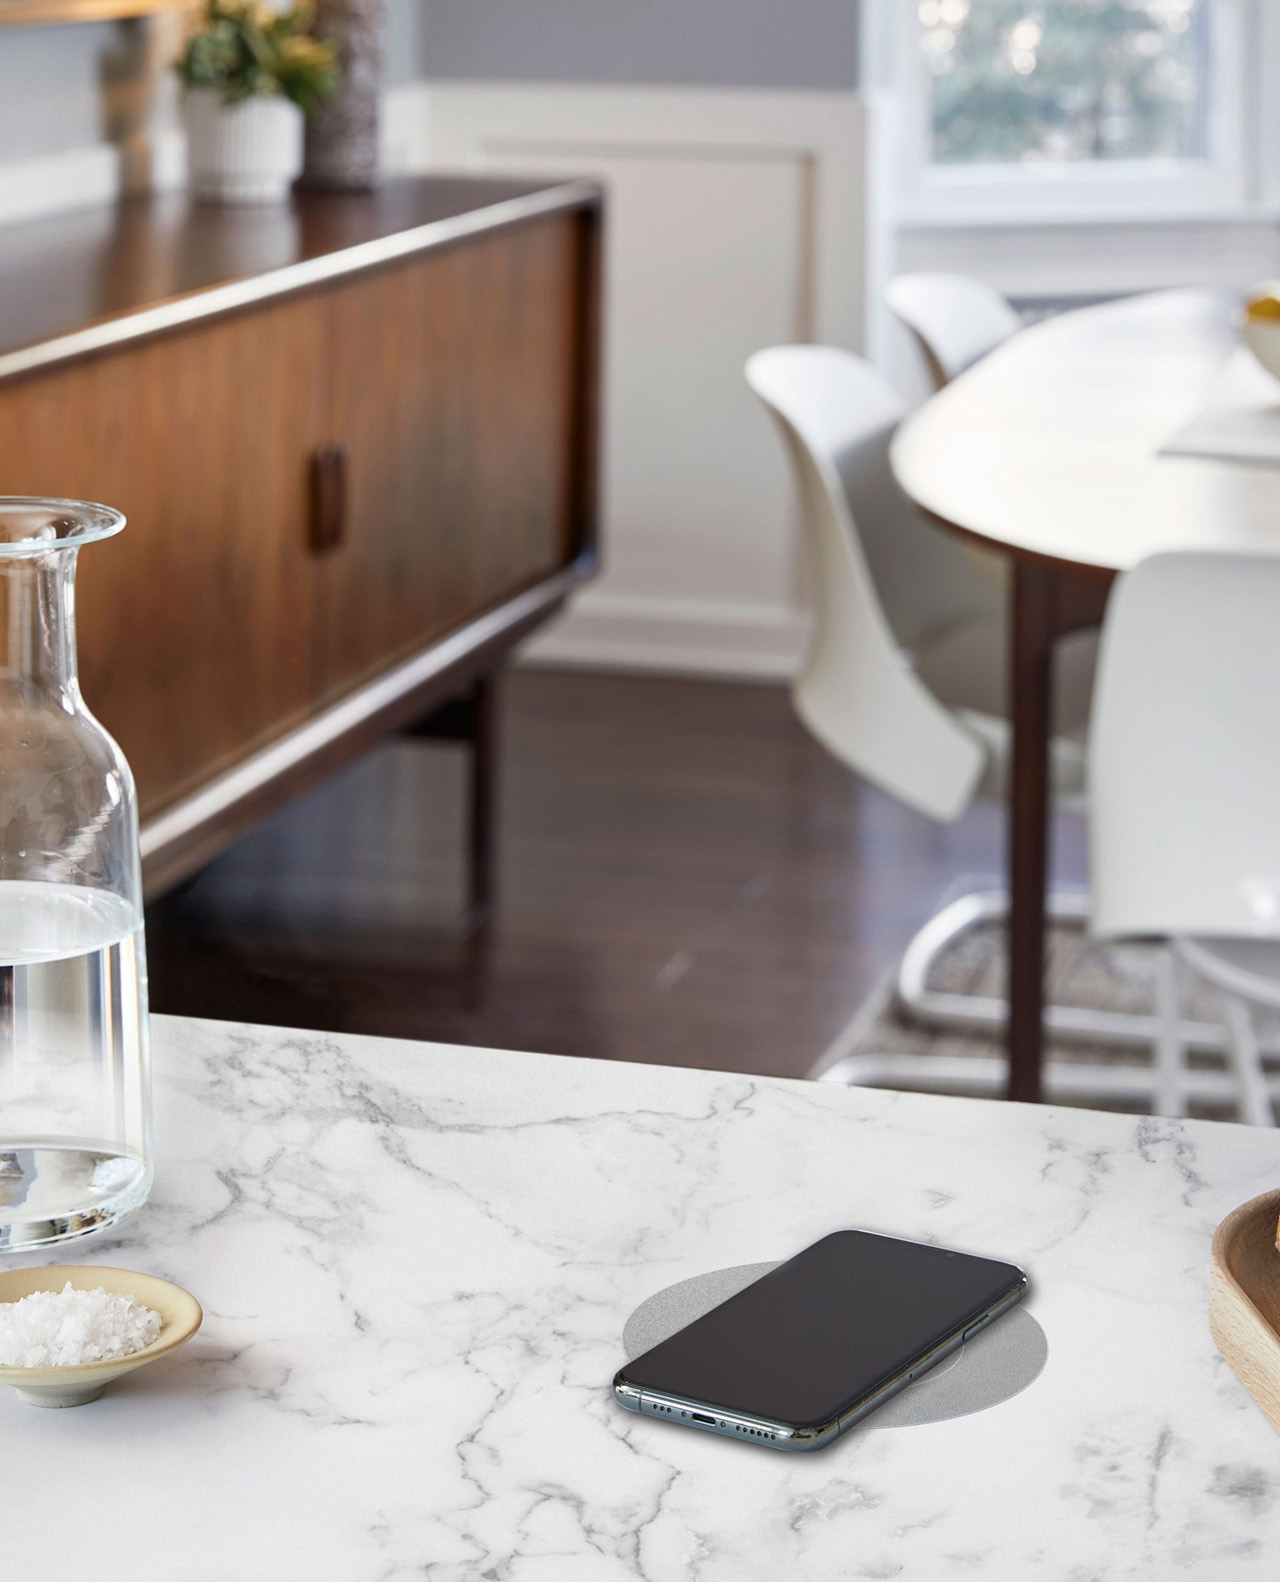 This tiny wireless charger is a convenient alternative to the Apple MagSafe Charger